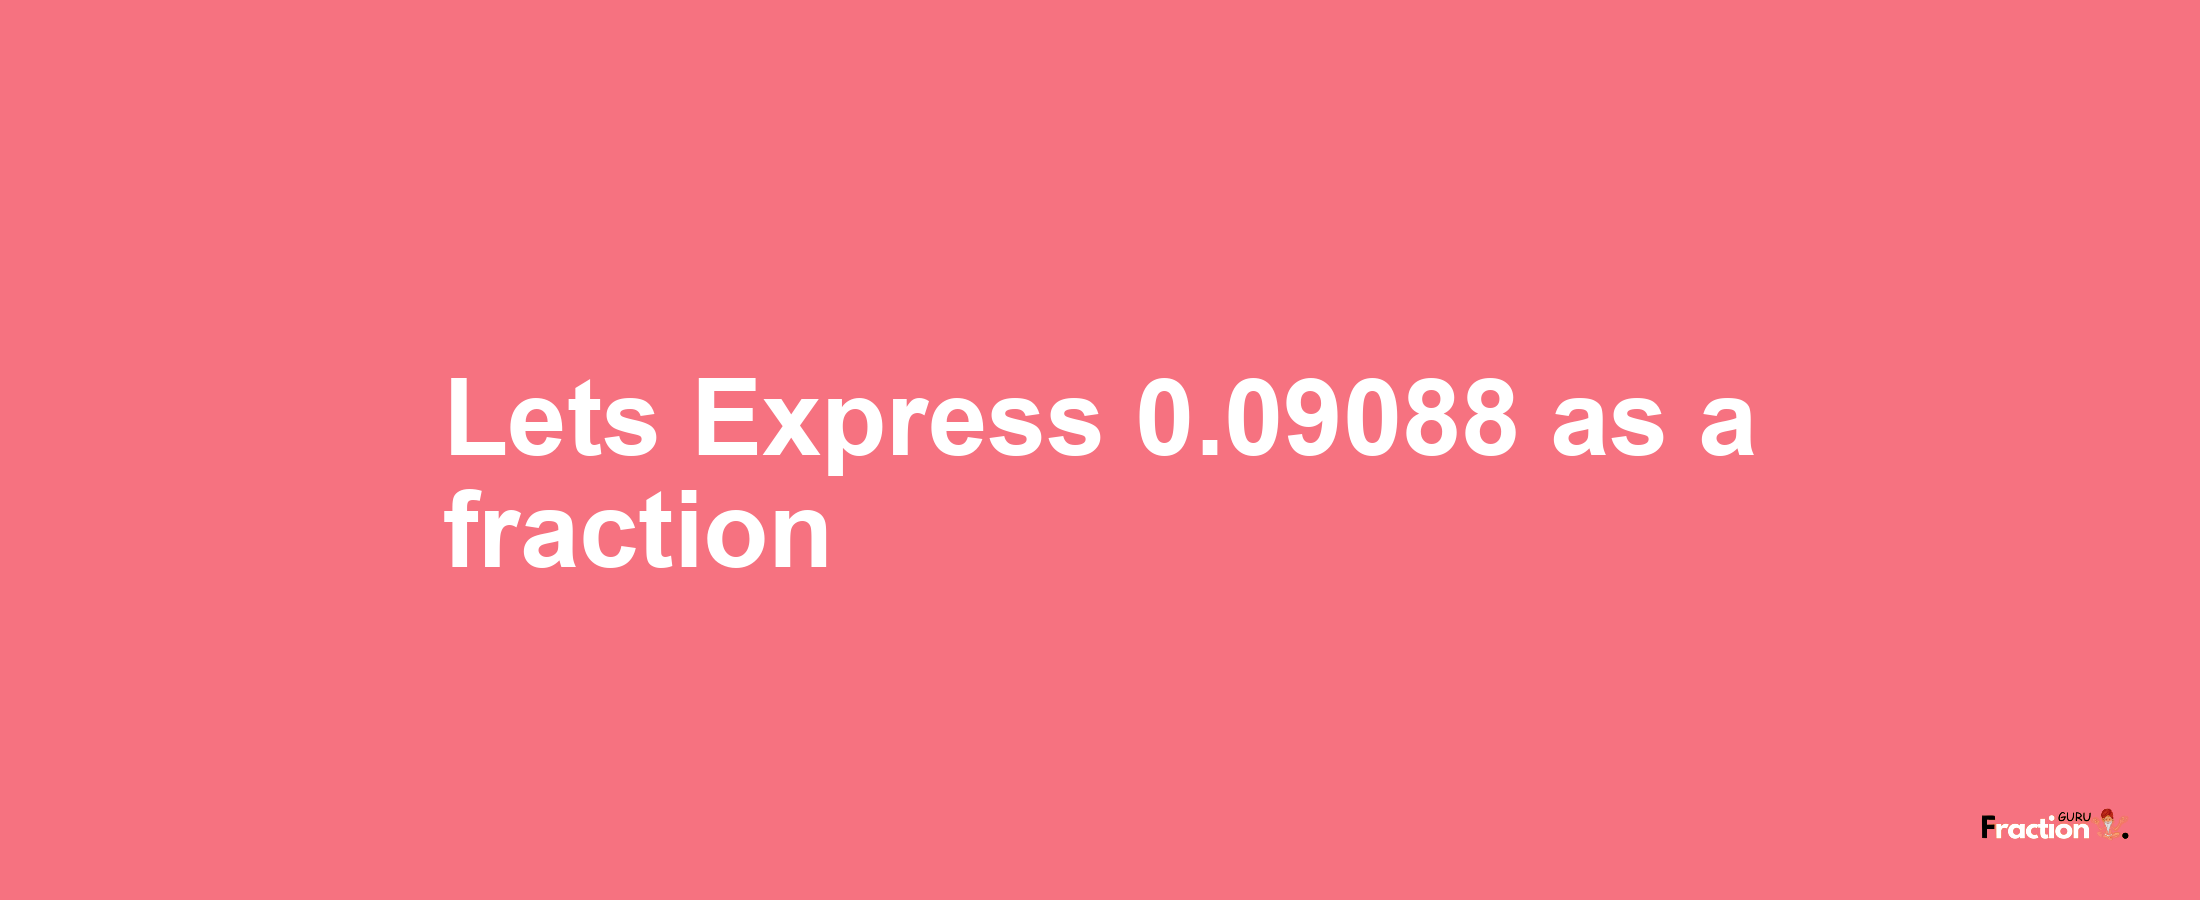 Lets Express 0.09088 as afraction